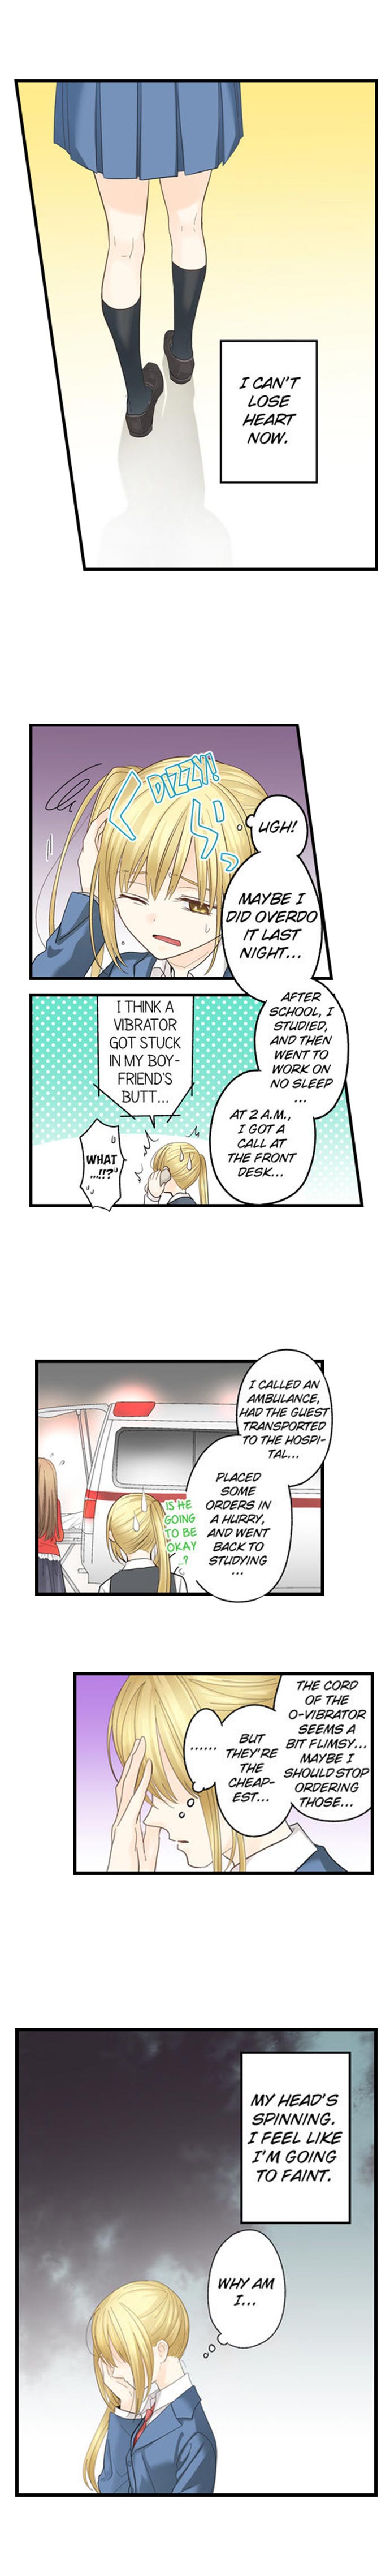 Running a Love Hotel with My Math Teacher - Chapter 6 Page 7